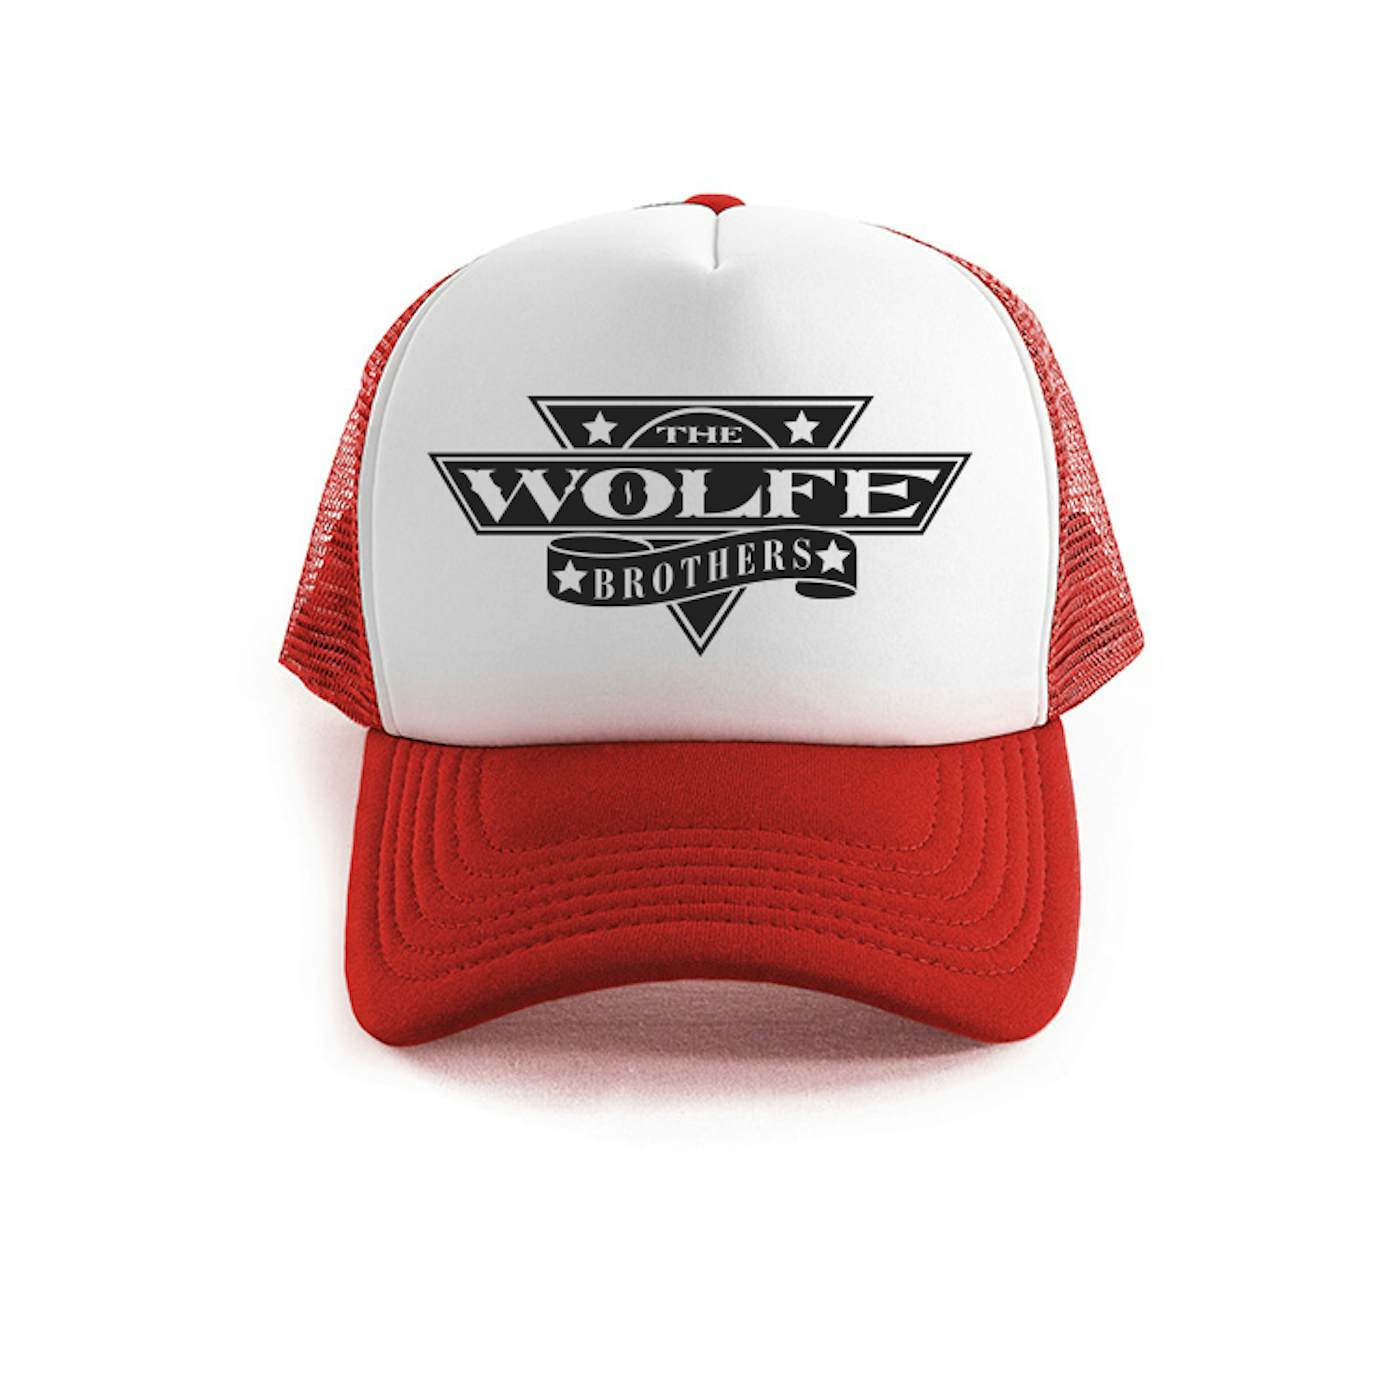 The Wolfe Brothers - Red Trucker Cap